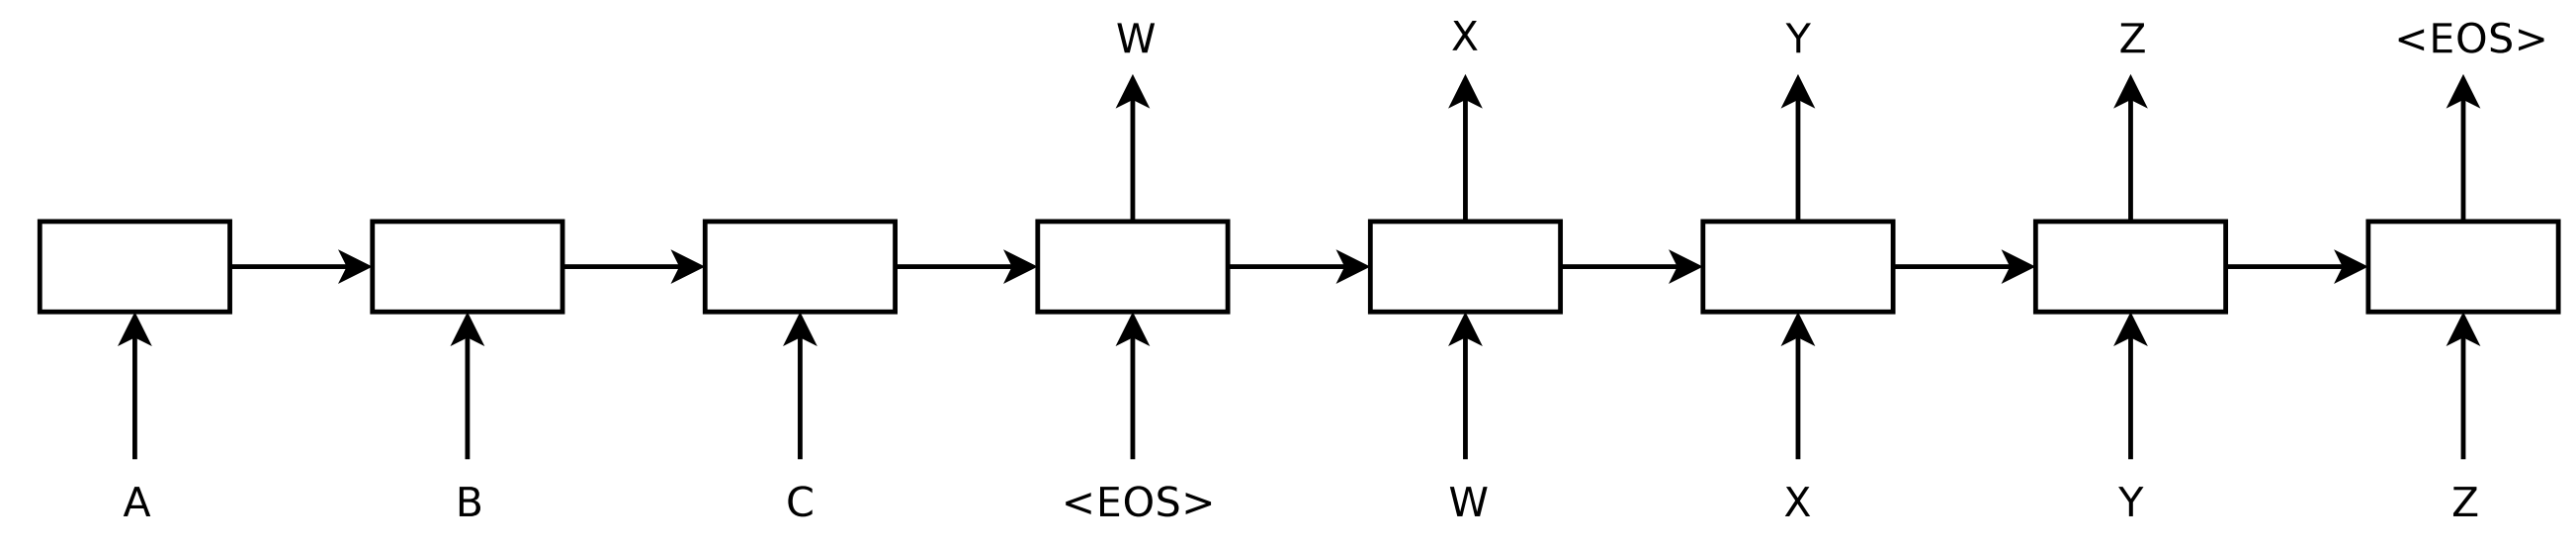 A sequence-to-sequence model (Sutskever et al., 2014)